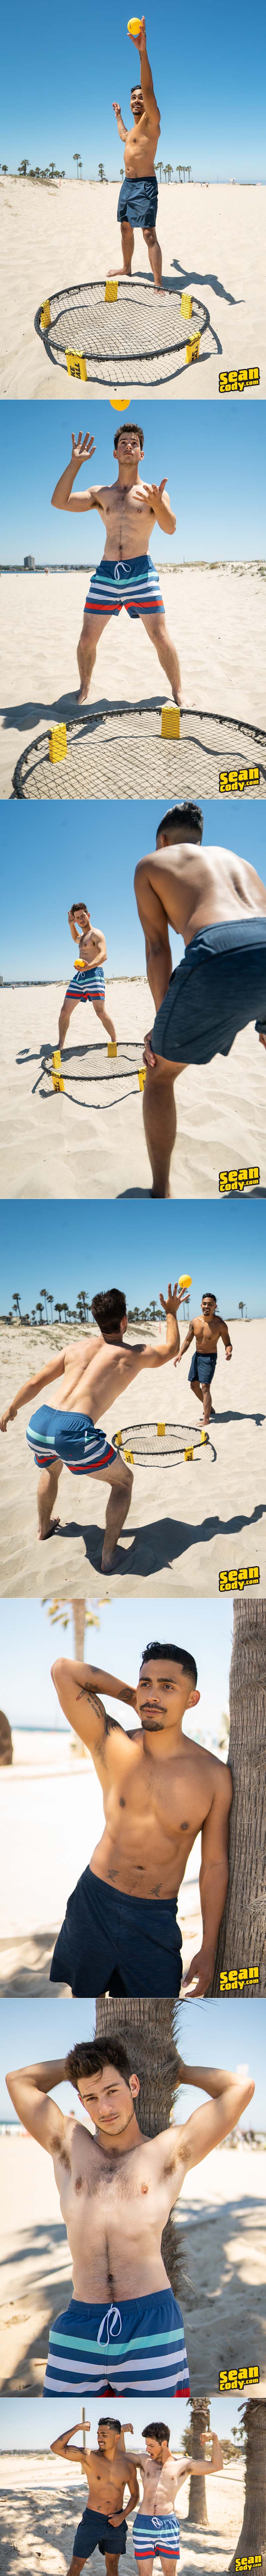 Archie and Asher Flip-Fuck at SeanCody